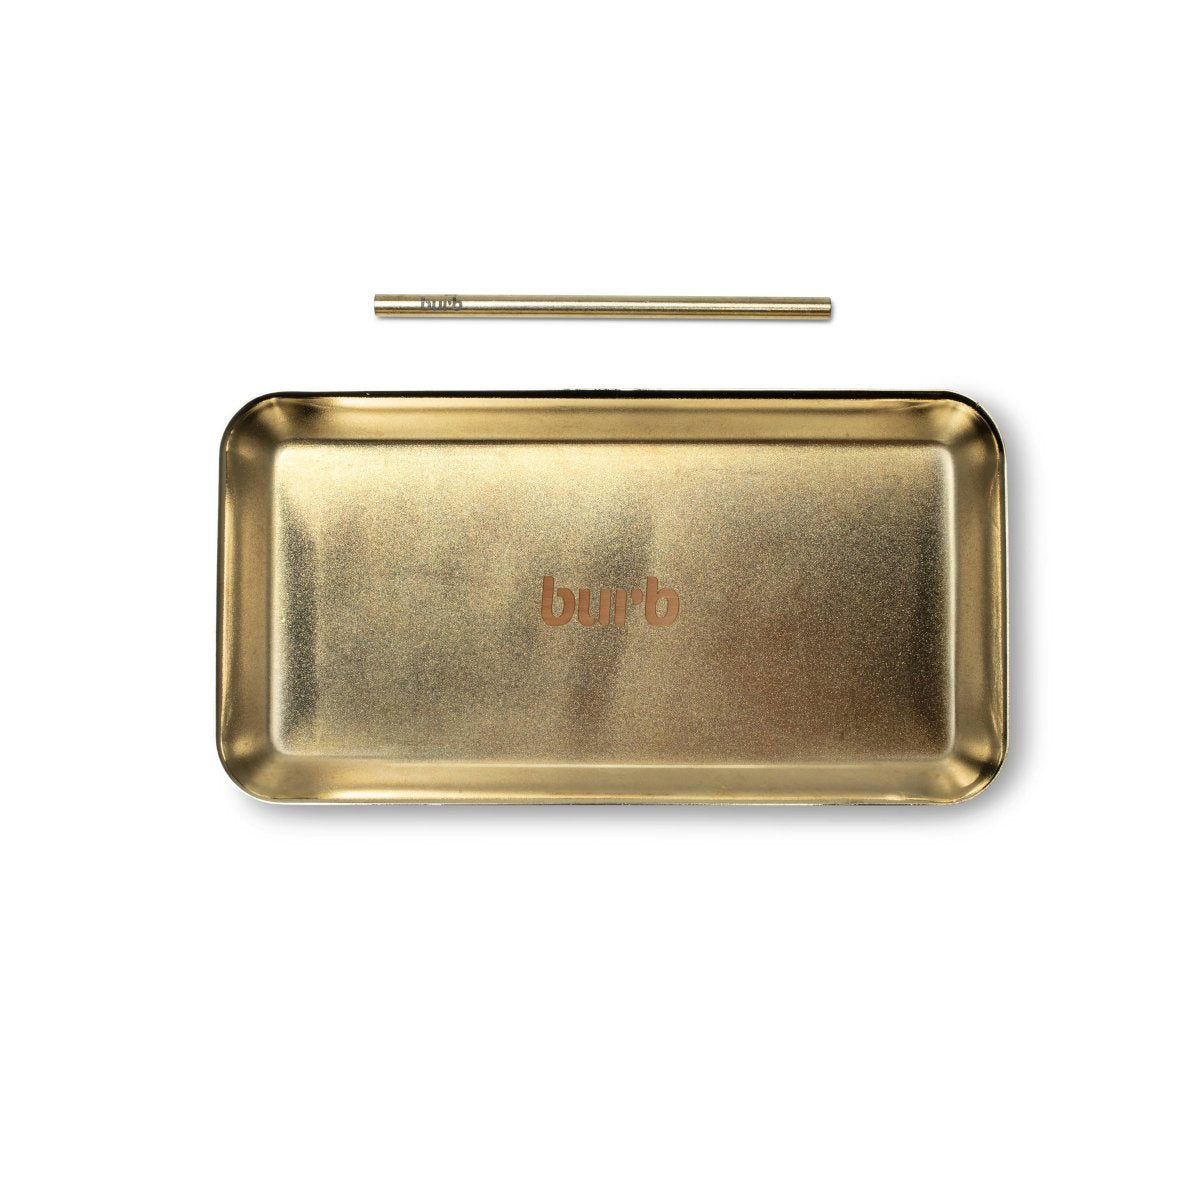 Burb Magnetic Rolling Tray